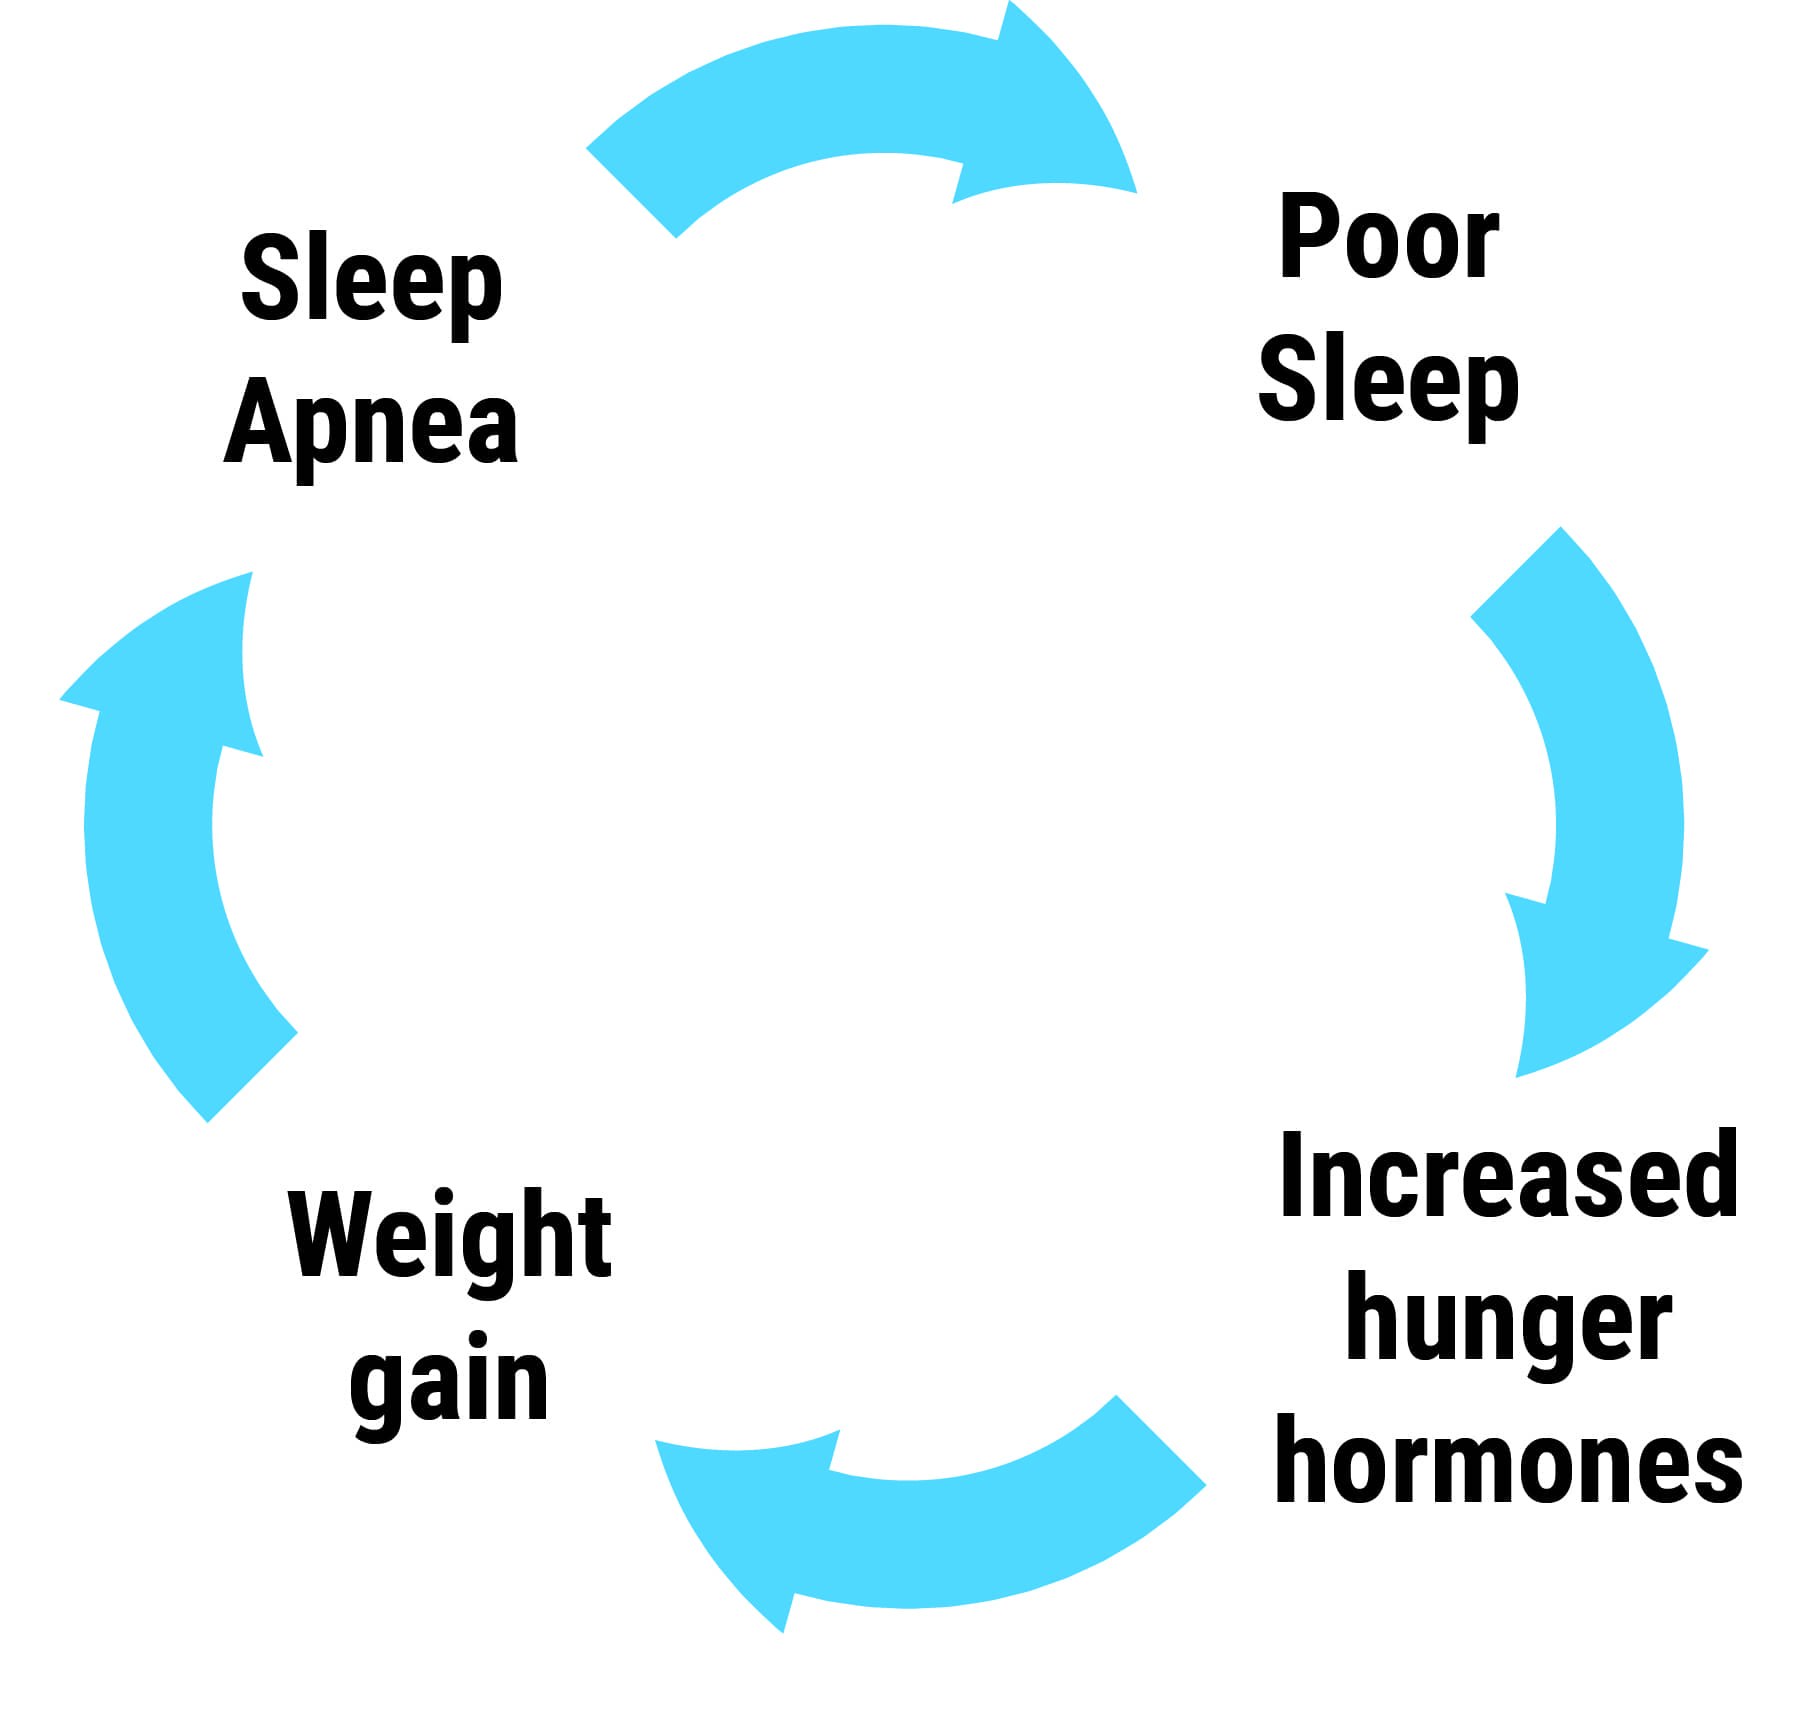 A continual cycle that shows that sleep apnea leads to poor sleep which leads to increased hunger hormones which weight gain. After that, the process repeats.